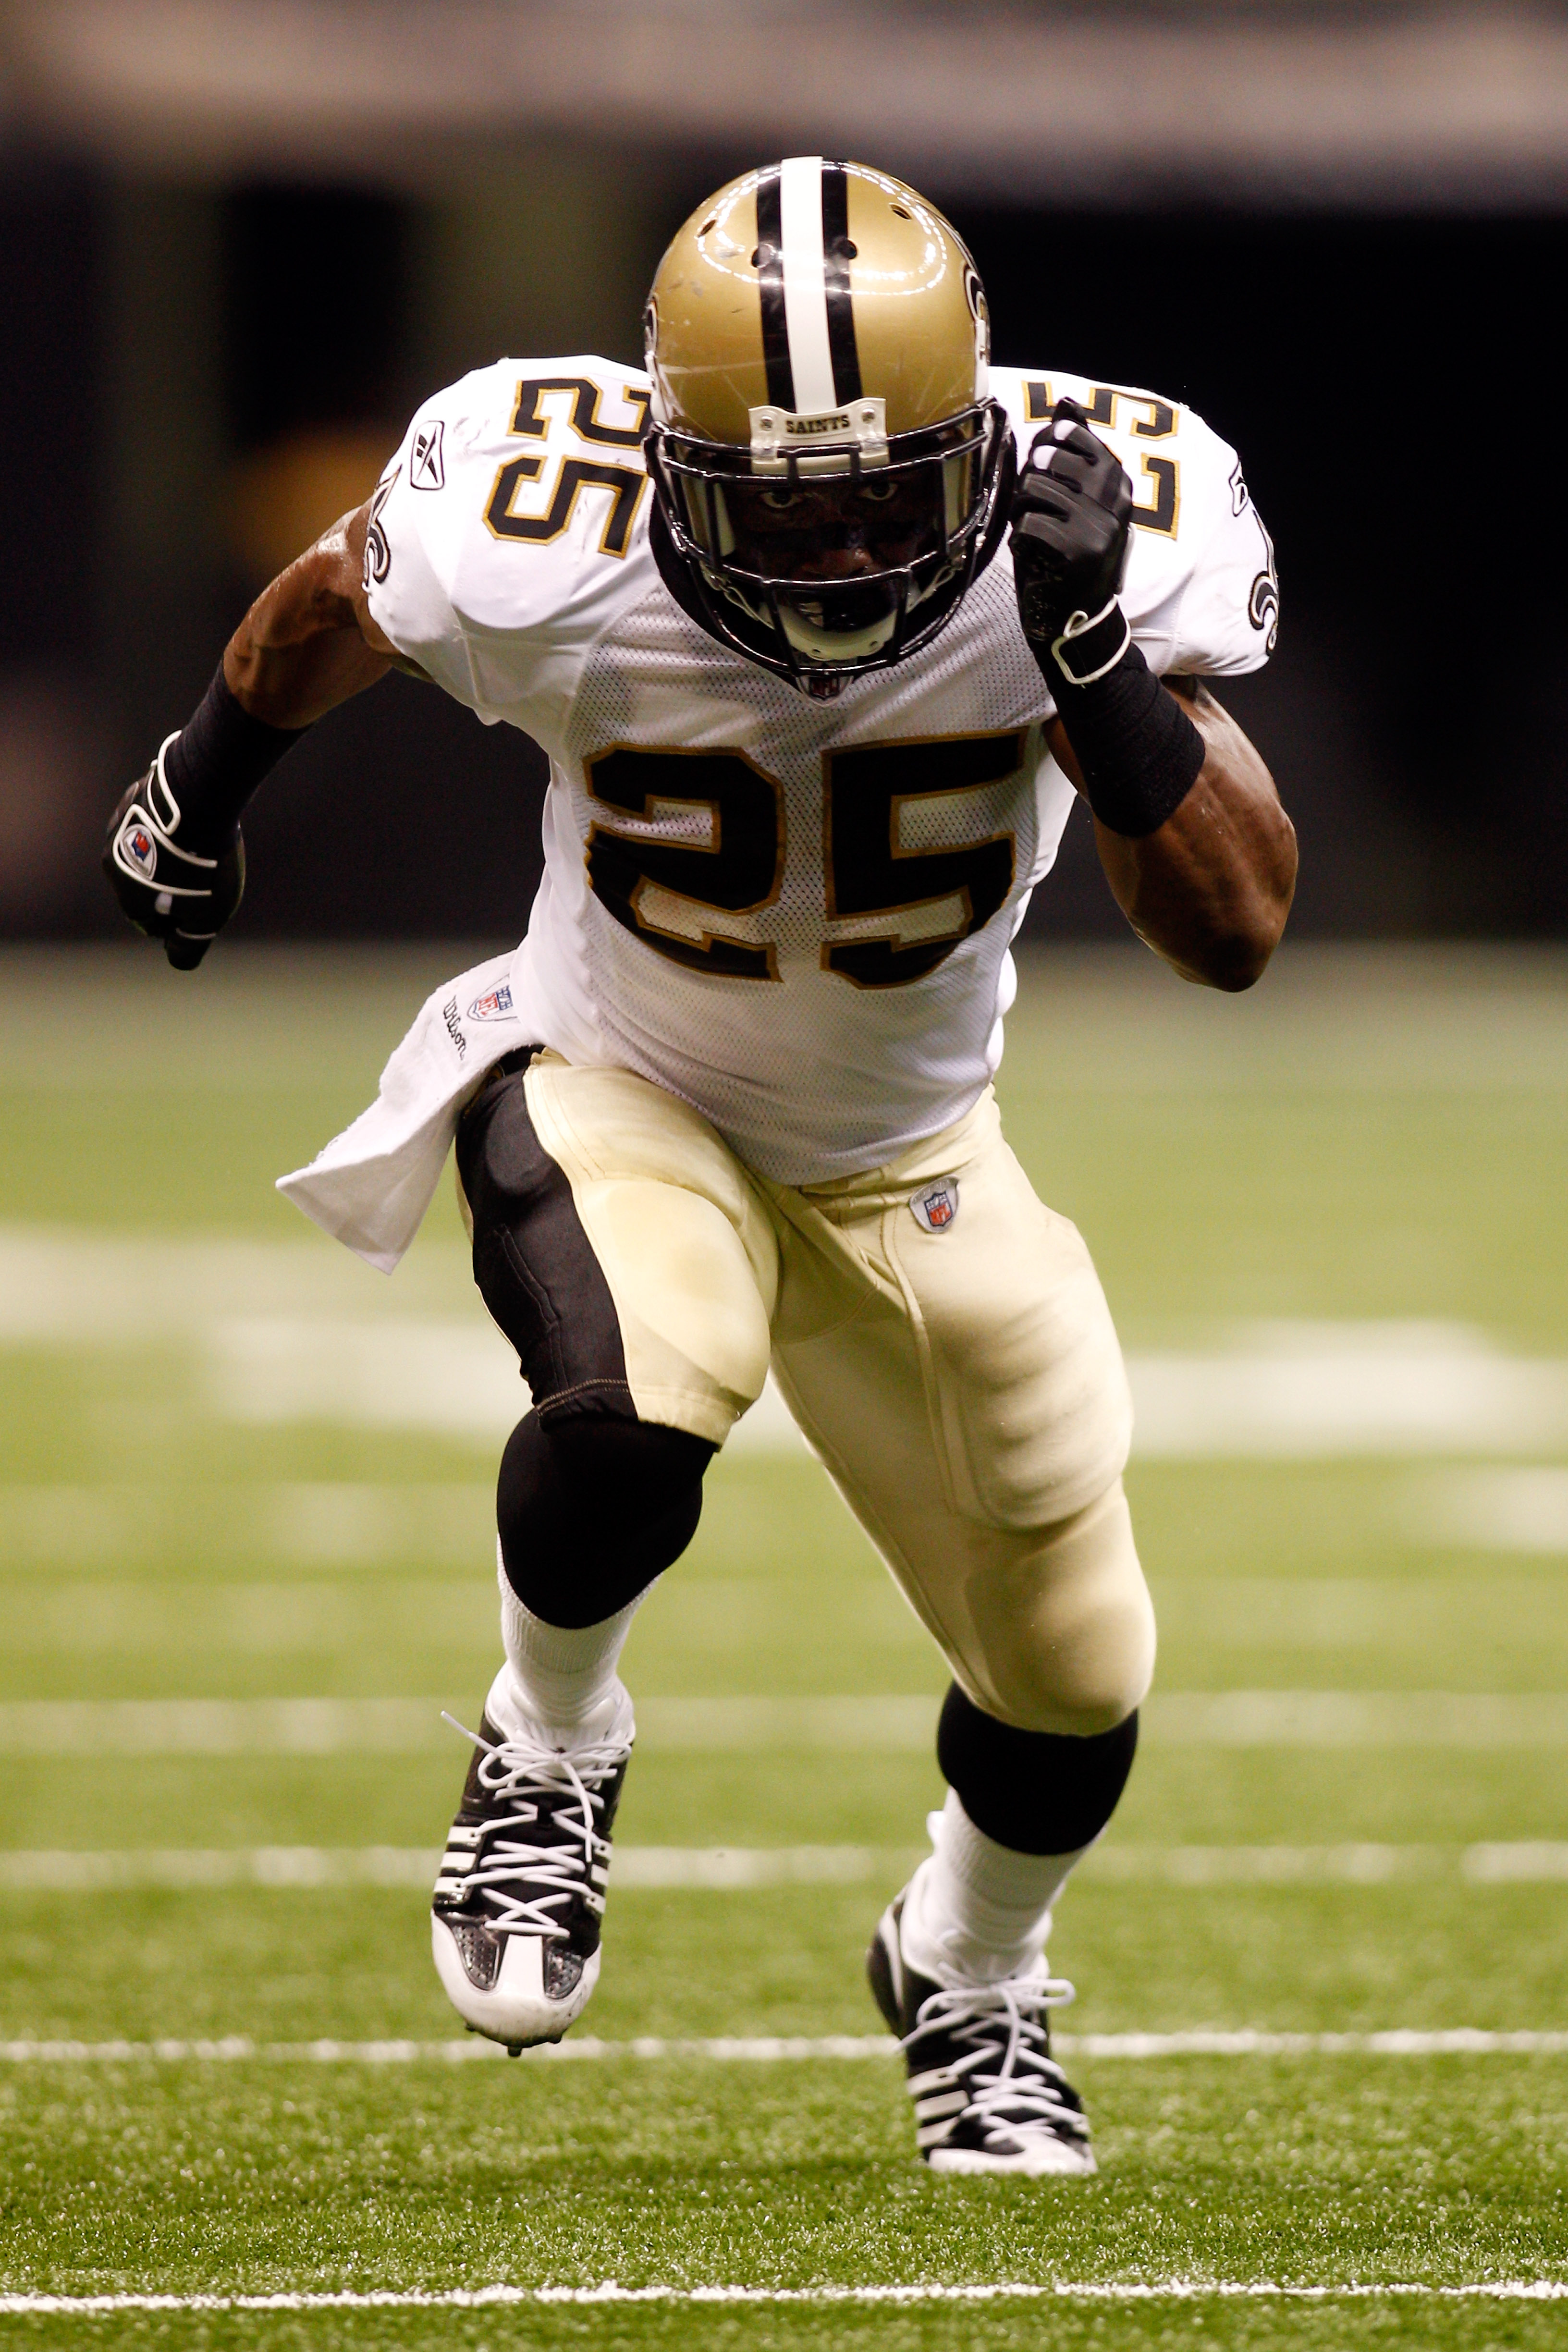 NEW ORLEANS - AUGUST 21:  Reggie Bush #25 of the New Orleans Saints in action against the Houston Texans at the Louisiana Superdome on August 21, 2010 in New Orleans, Louisiana.  (Photo by Chris Graythen/Getty Images)